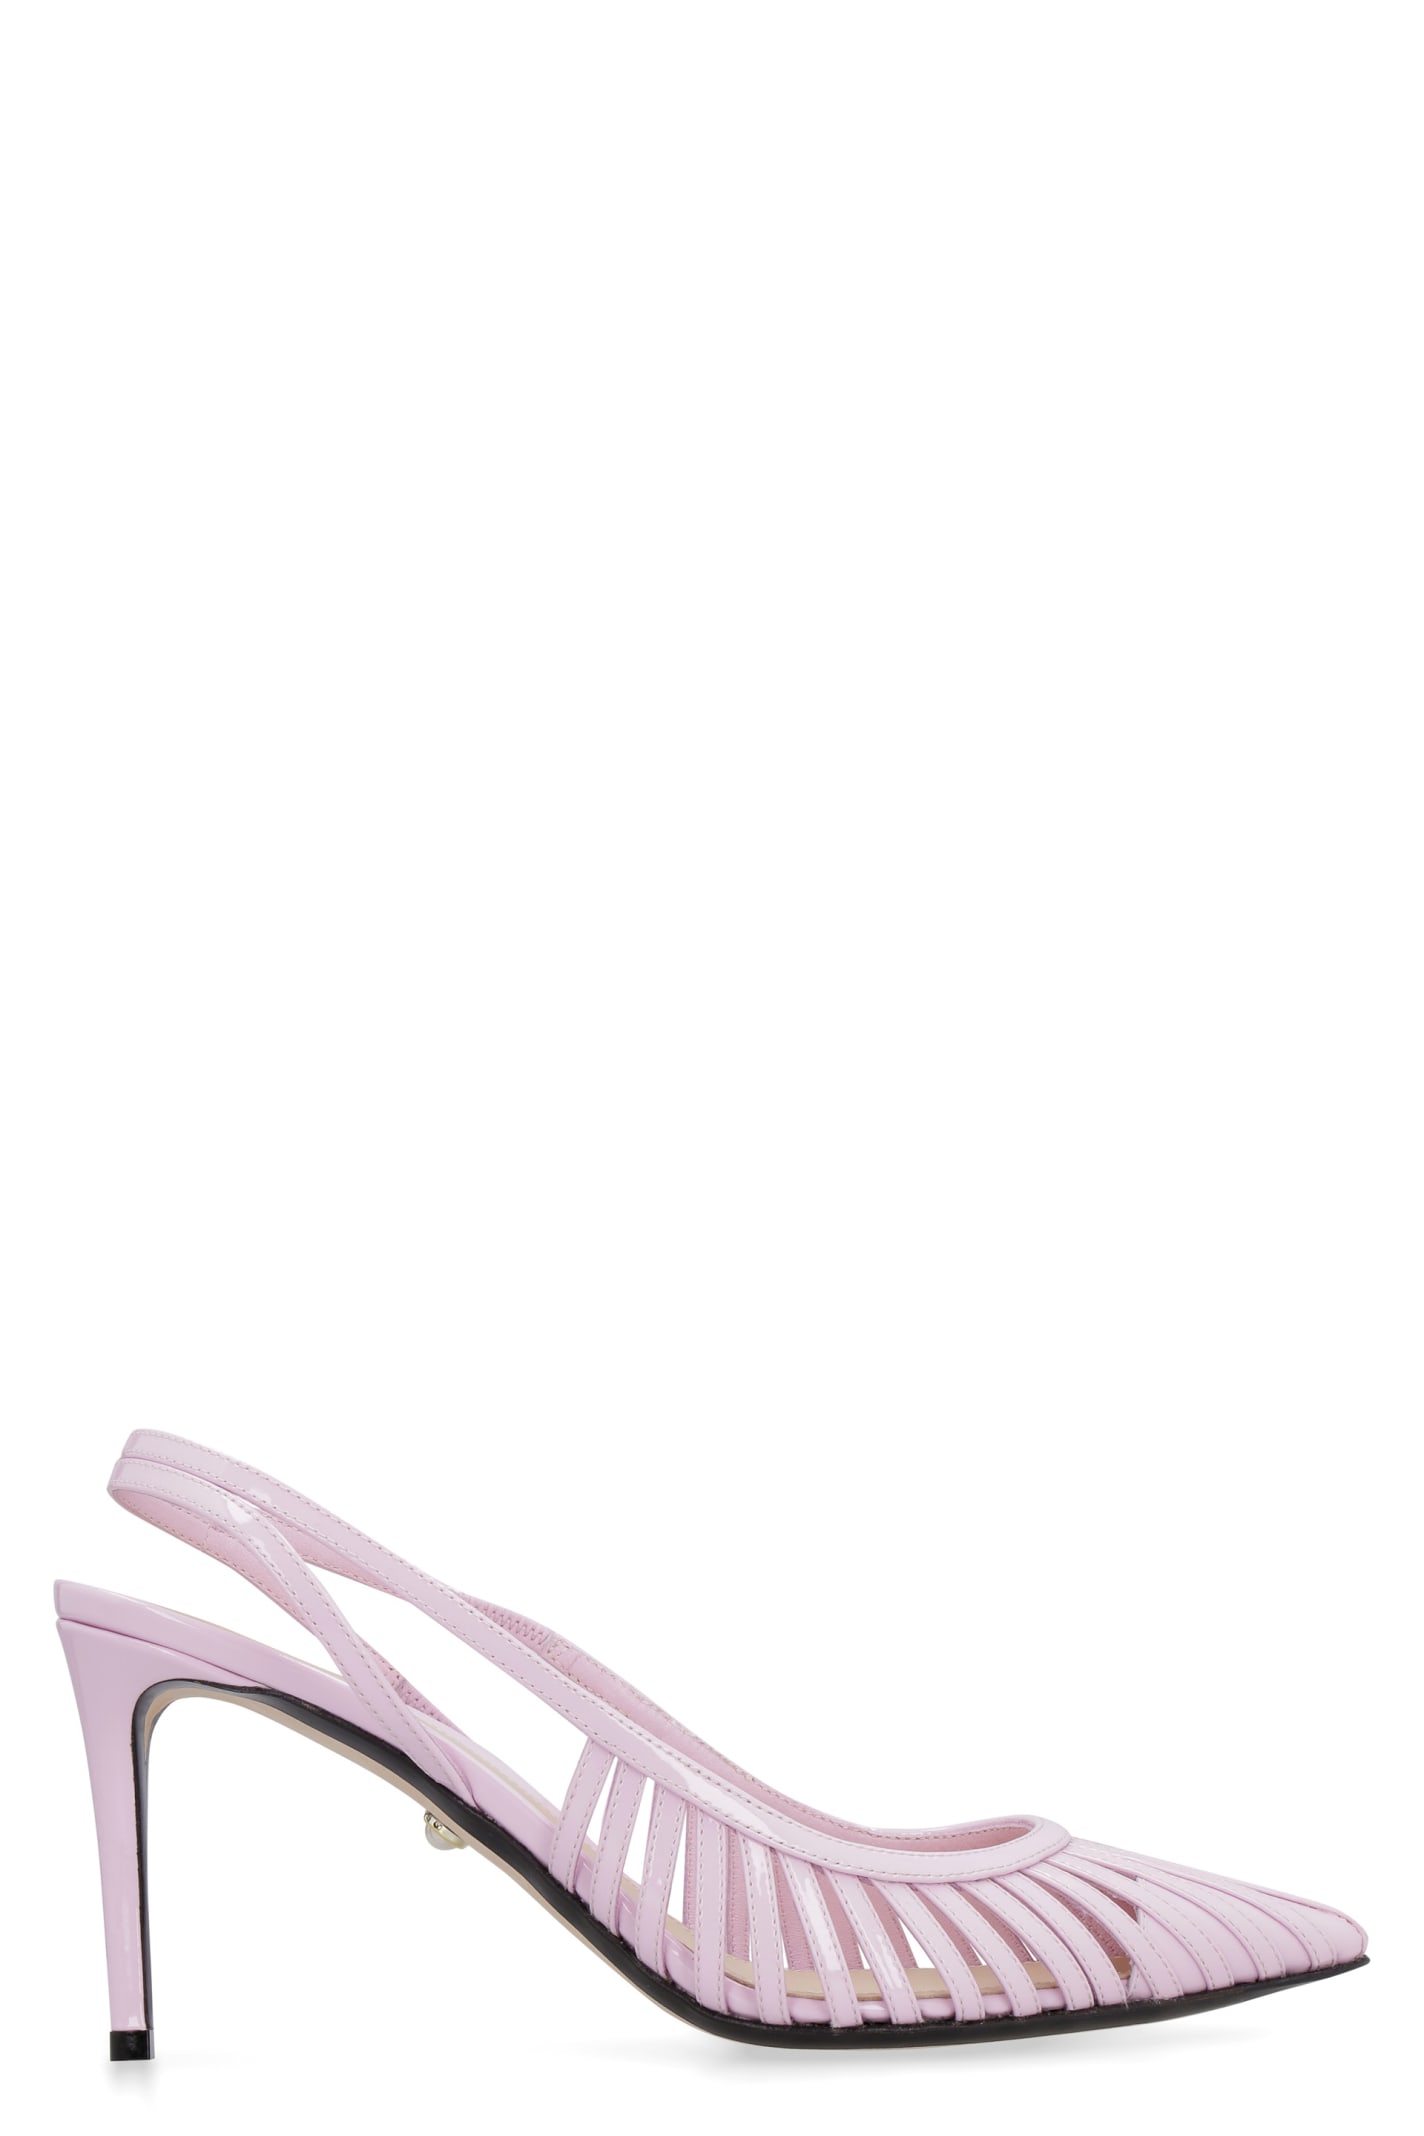 Alevì Dallas Patent Leather Slingback Pumps In Pink